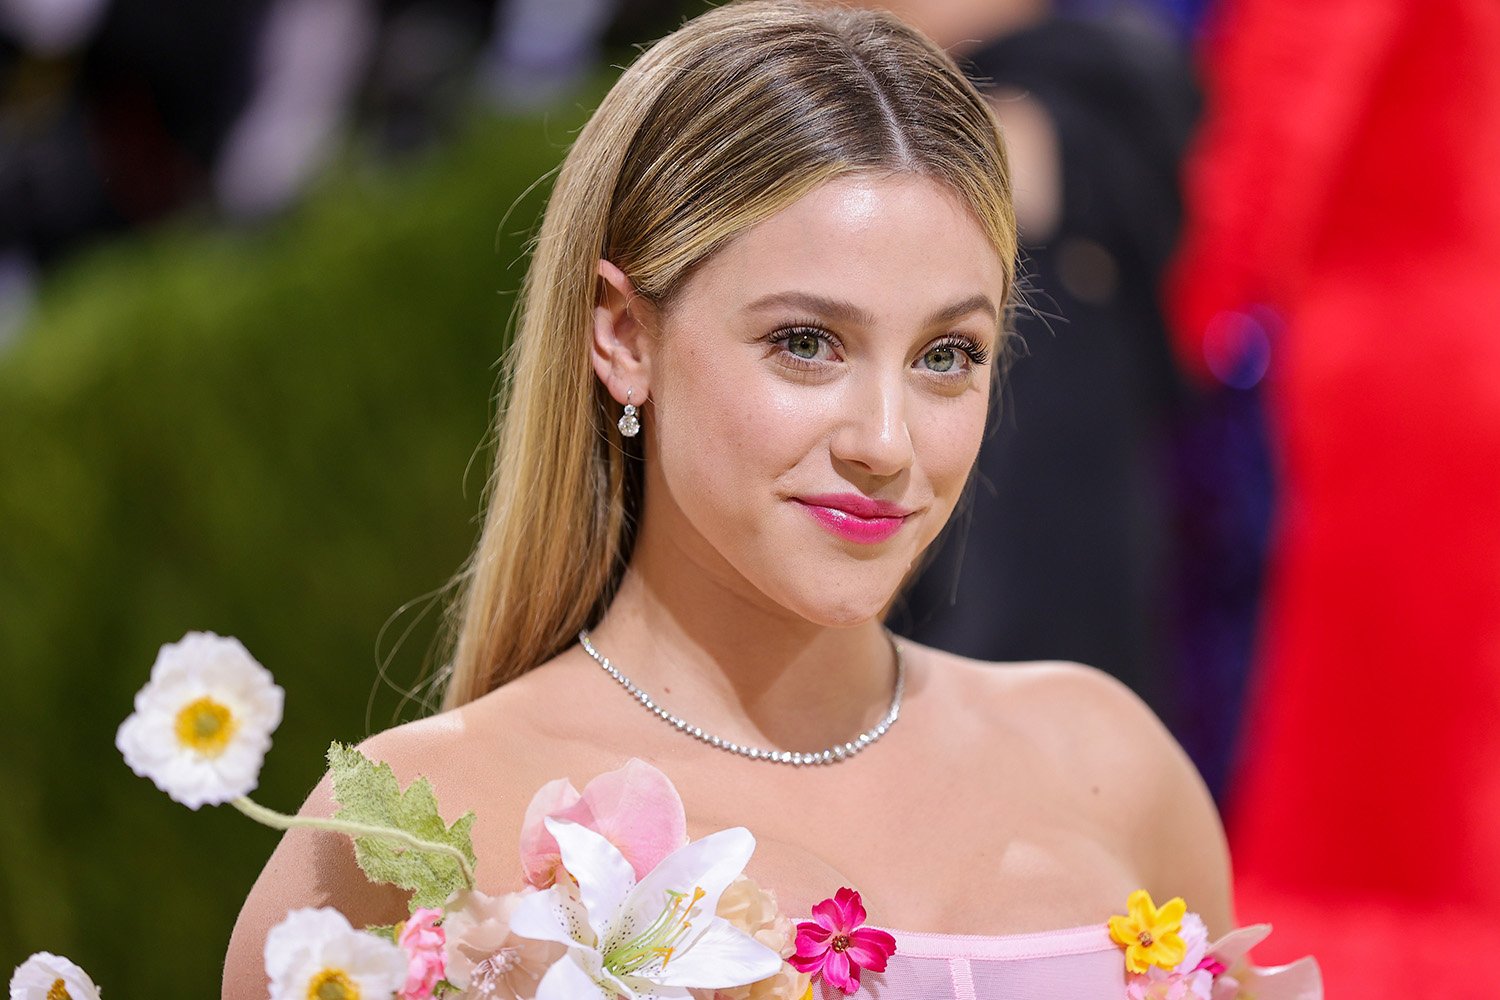 Lili Reinhart, who plays Betty Cooper on Riverdale, at the 2021 Met Gala